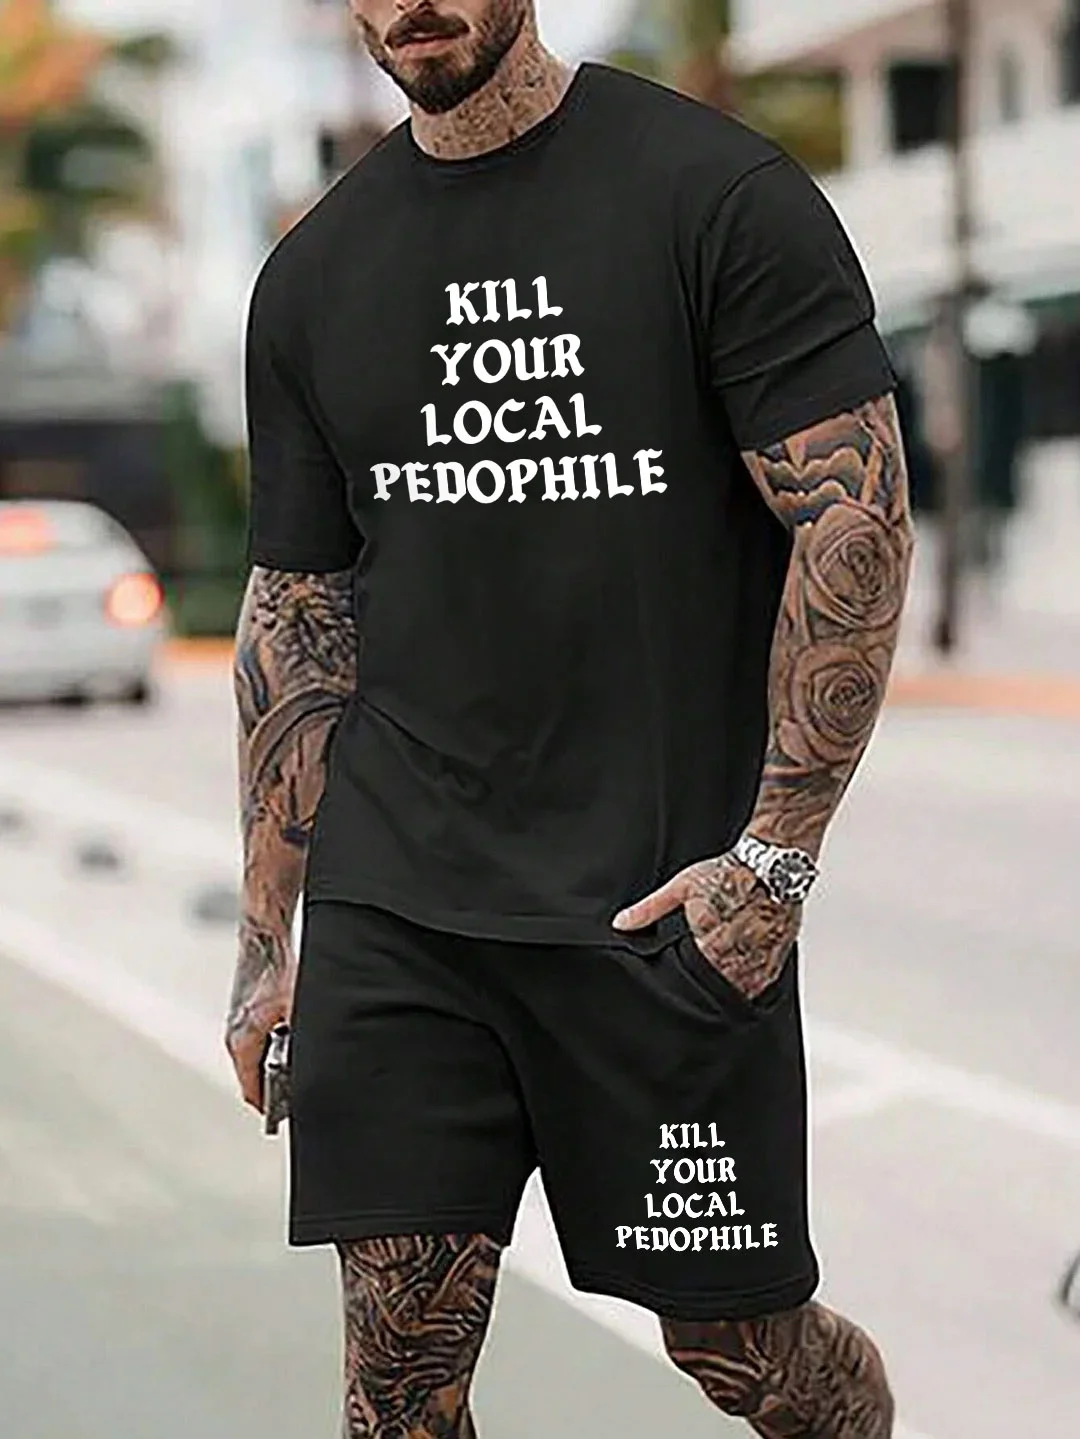 KILL YOUR LOCAL PEDOPHILE Black T-shirt and Shorts Printed Suit